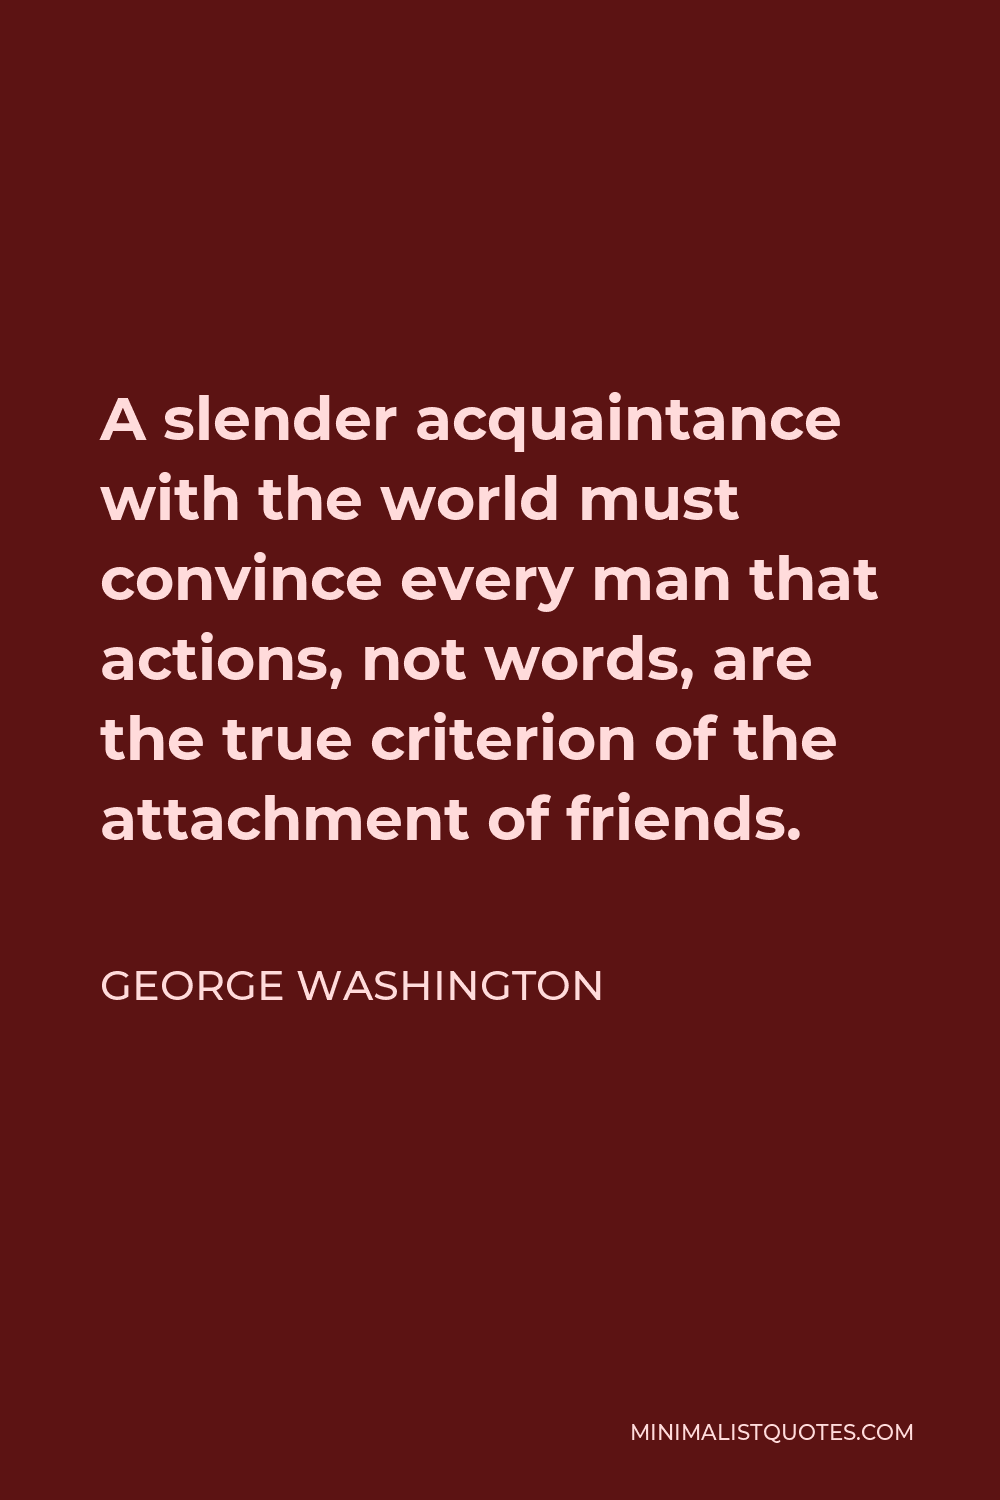 George Washington Quote - A slender acquaintance with the world must convince every man that actions, not words, are the true criterion of the attachment of friends.